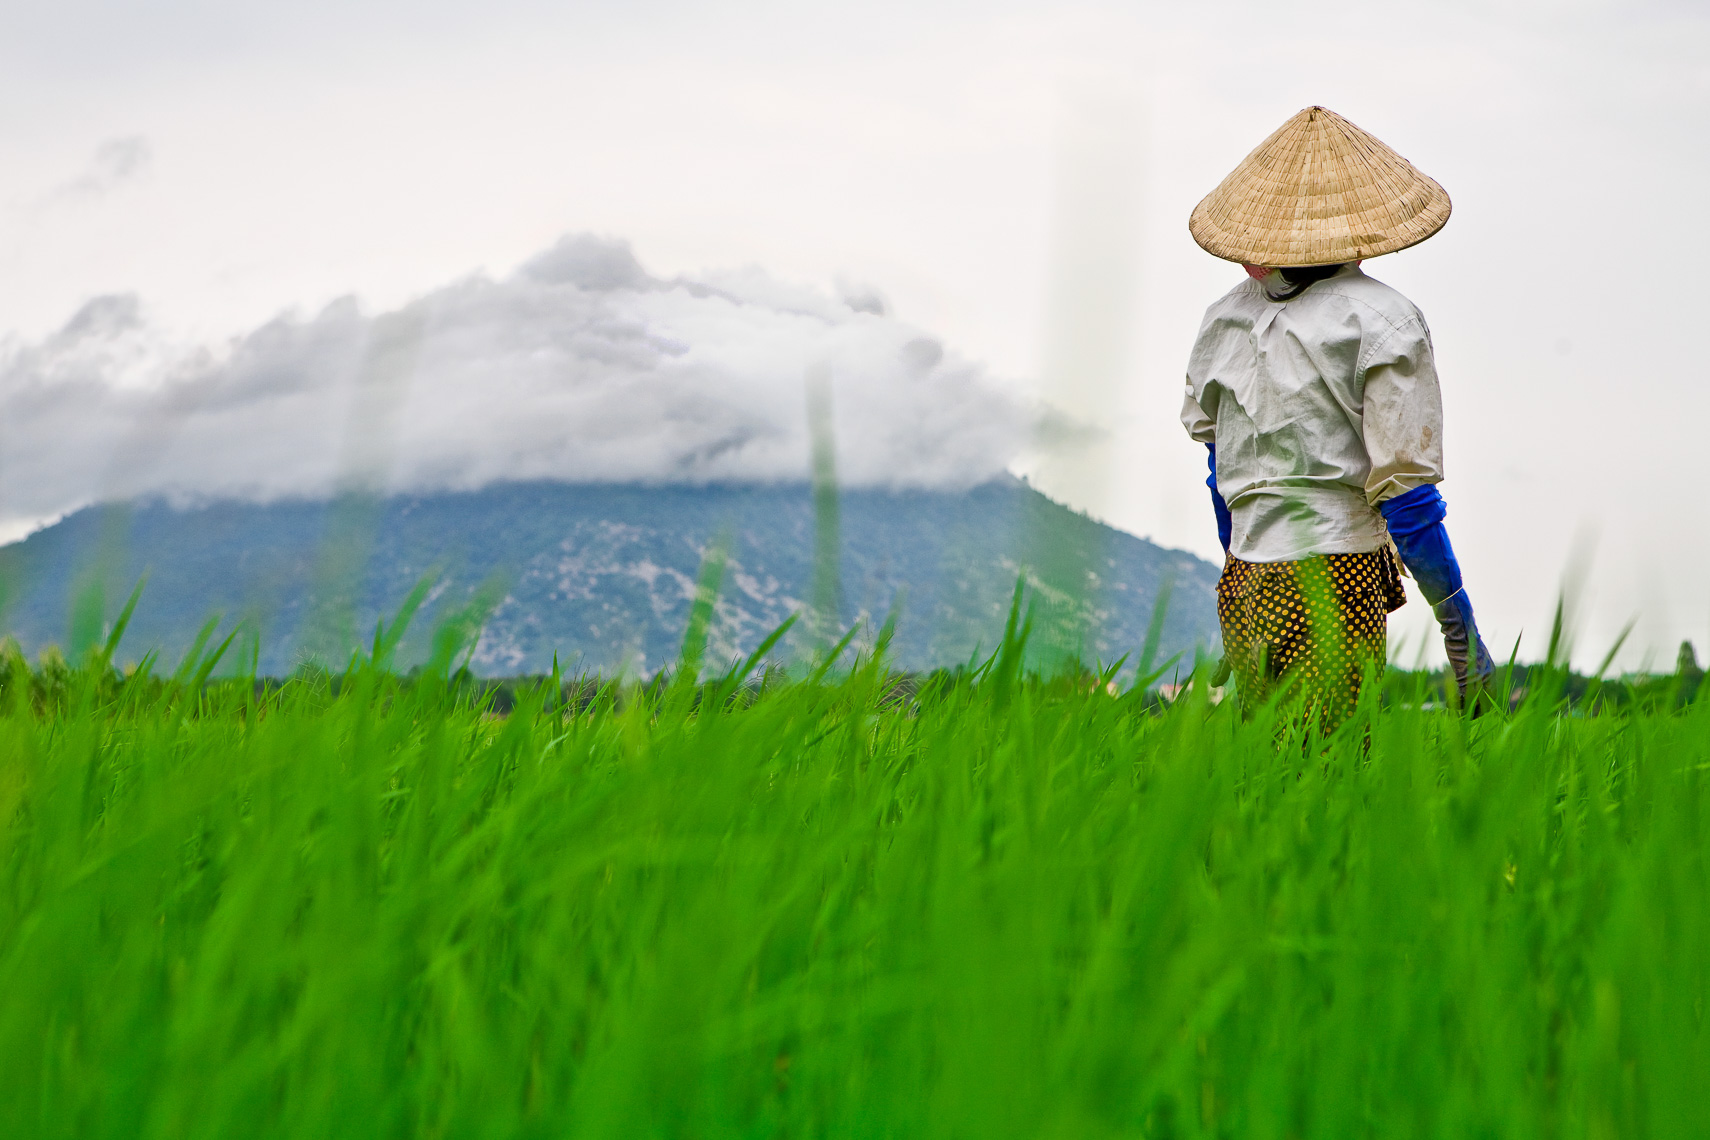 a rice planter in vietnam looks at black lady mountian